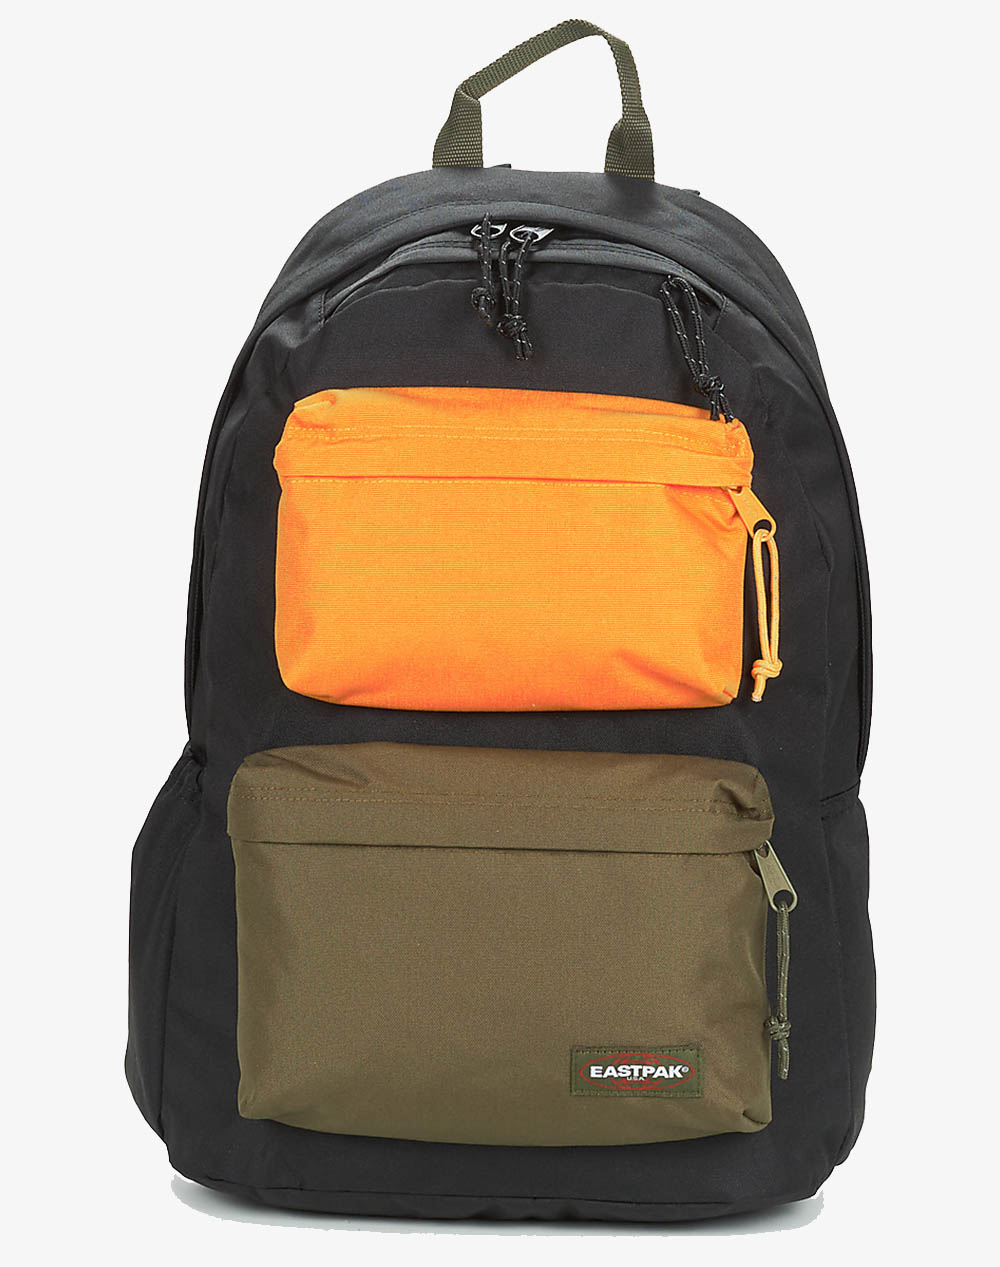 EASTPAK PADDED DOUBLE ΤΣΑΝΤΑ (Διαστάσεις: 47 x 30 x 8 εκ.) EK0A5B7Y-EK4A1 Multi 0400BEAST6220088_XR22674